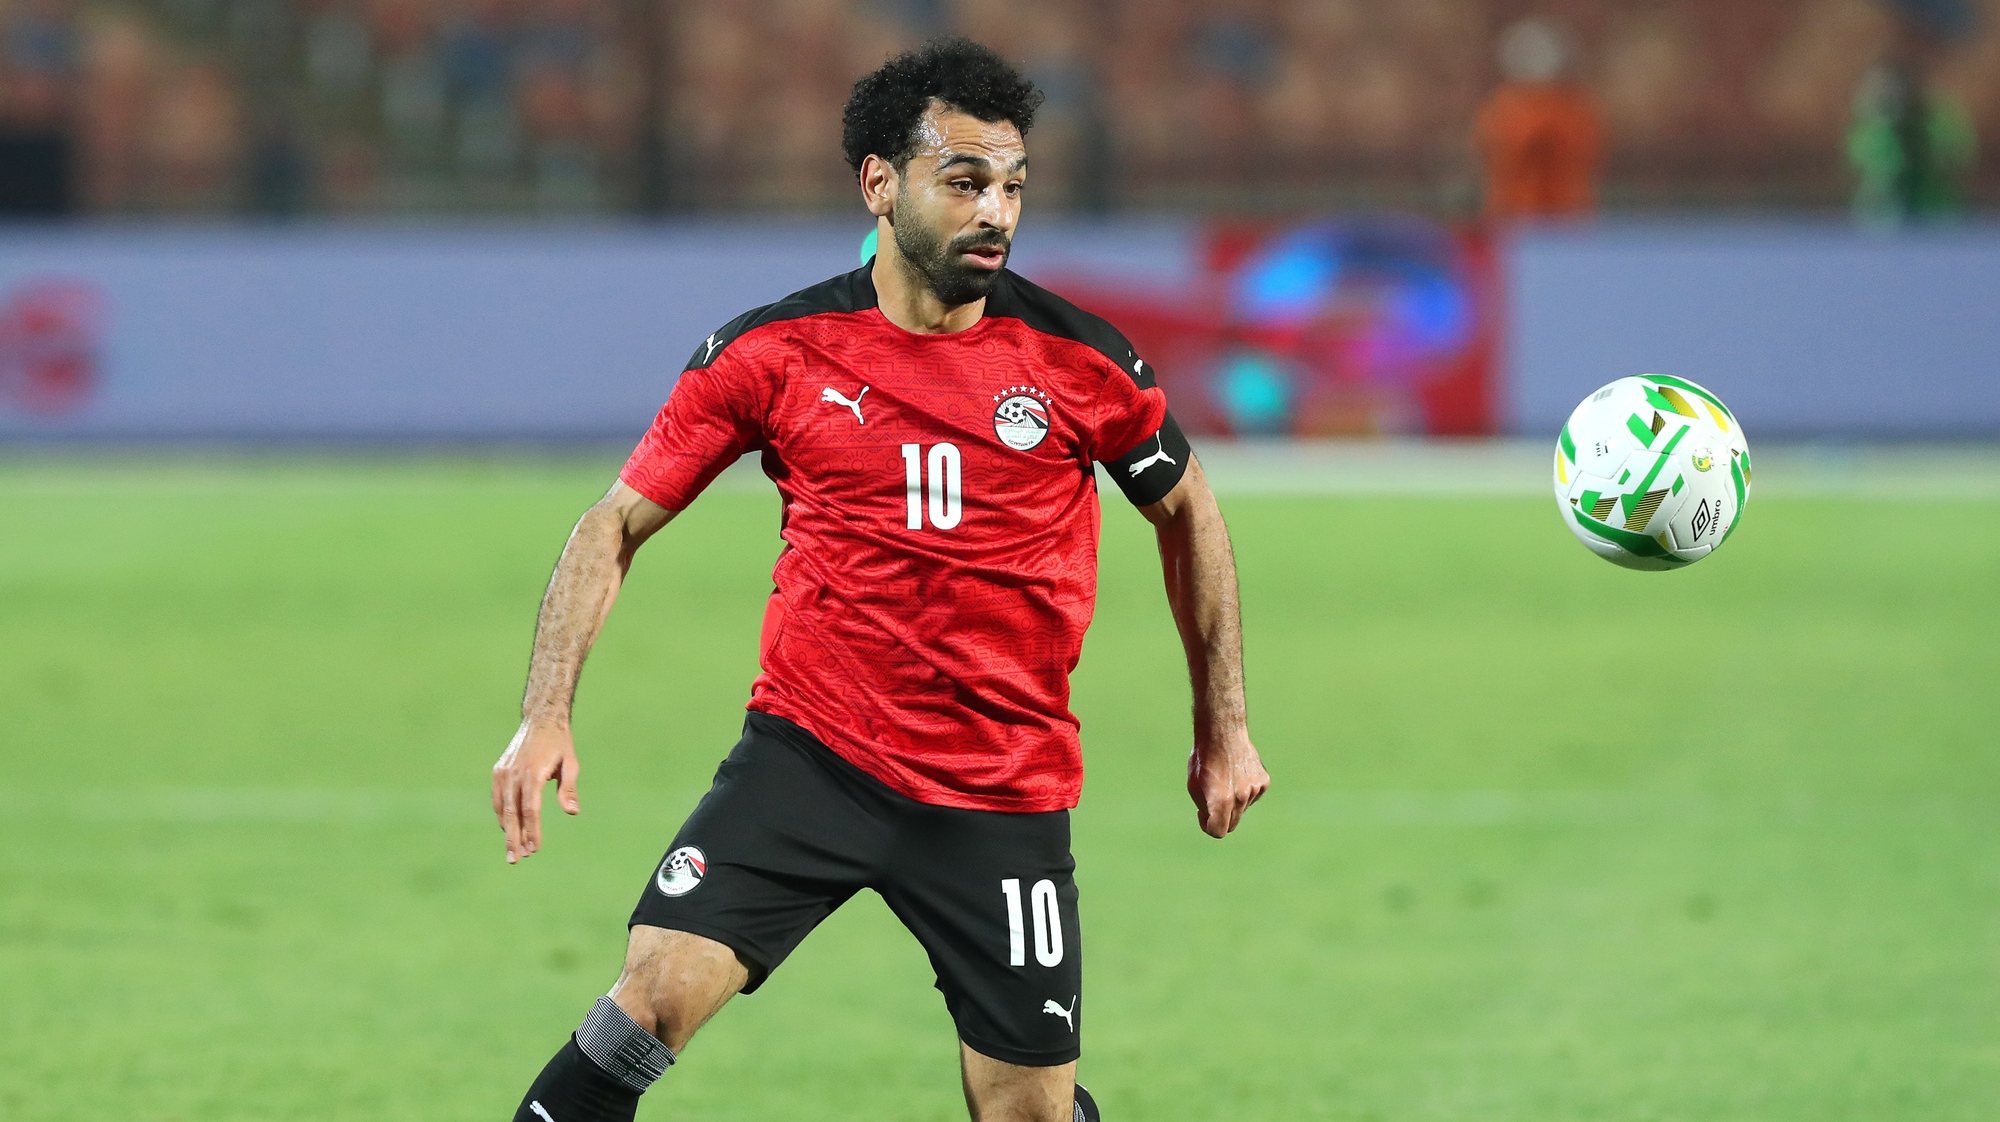 epa09998213 Mohamed Salah of Egypt in action during the Africa Cup of Nations (AFCON) qualifying soccer match between Egypt and Guinea in Cairo, Egypt, 05 June 2022.  EPA/KHALED ELFIQI